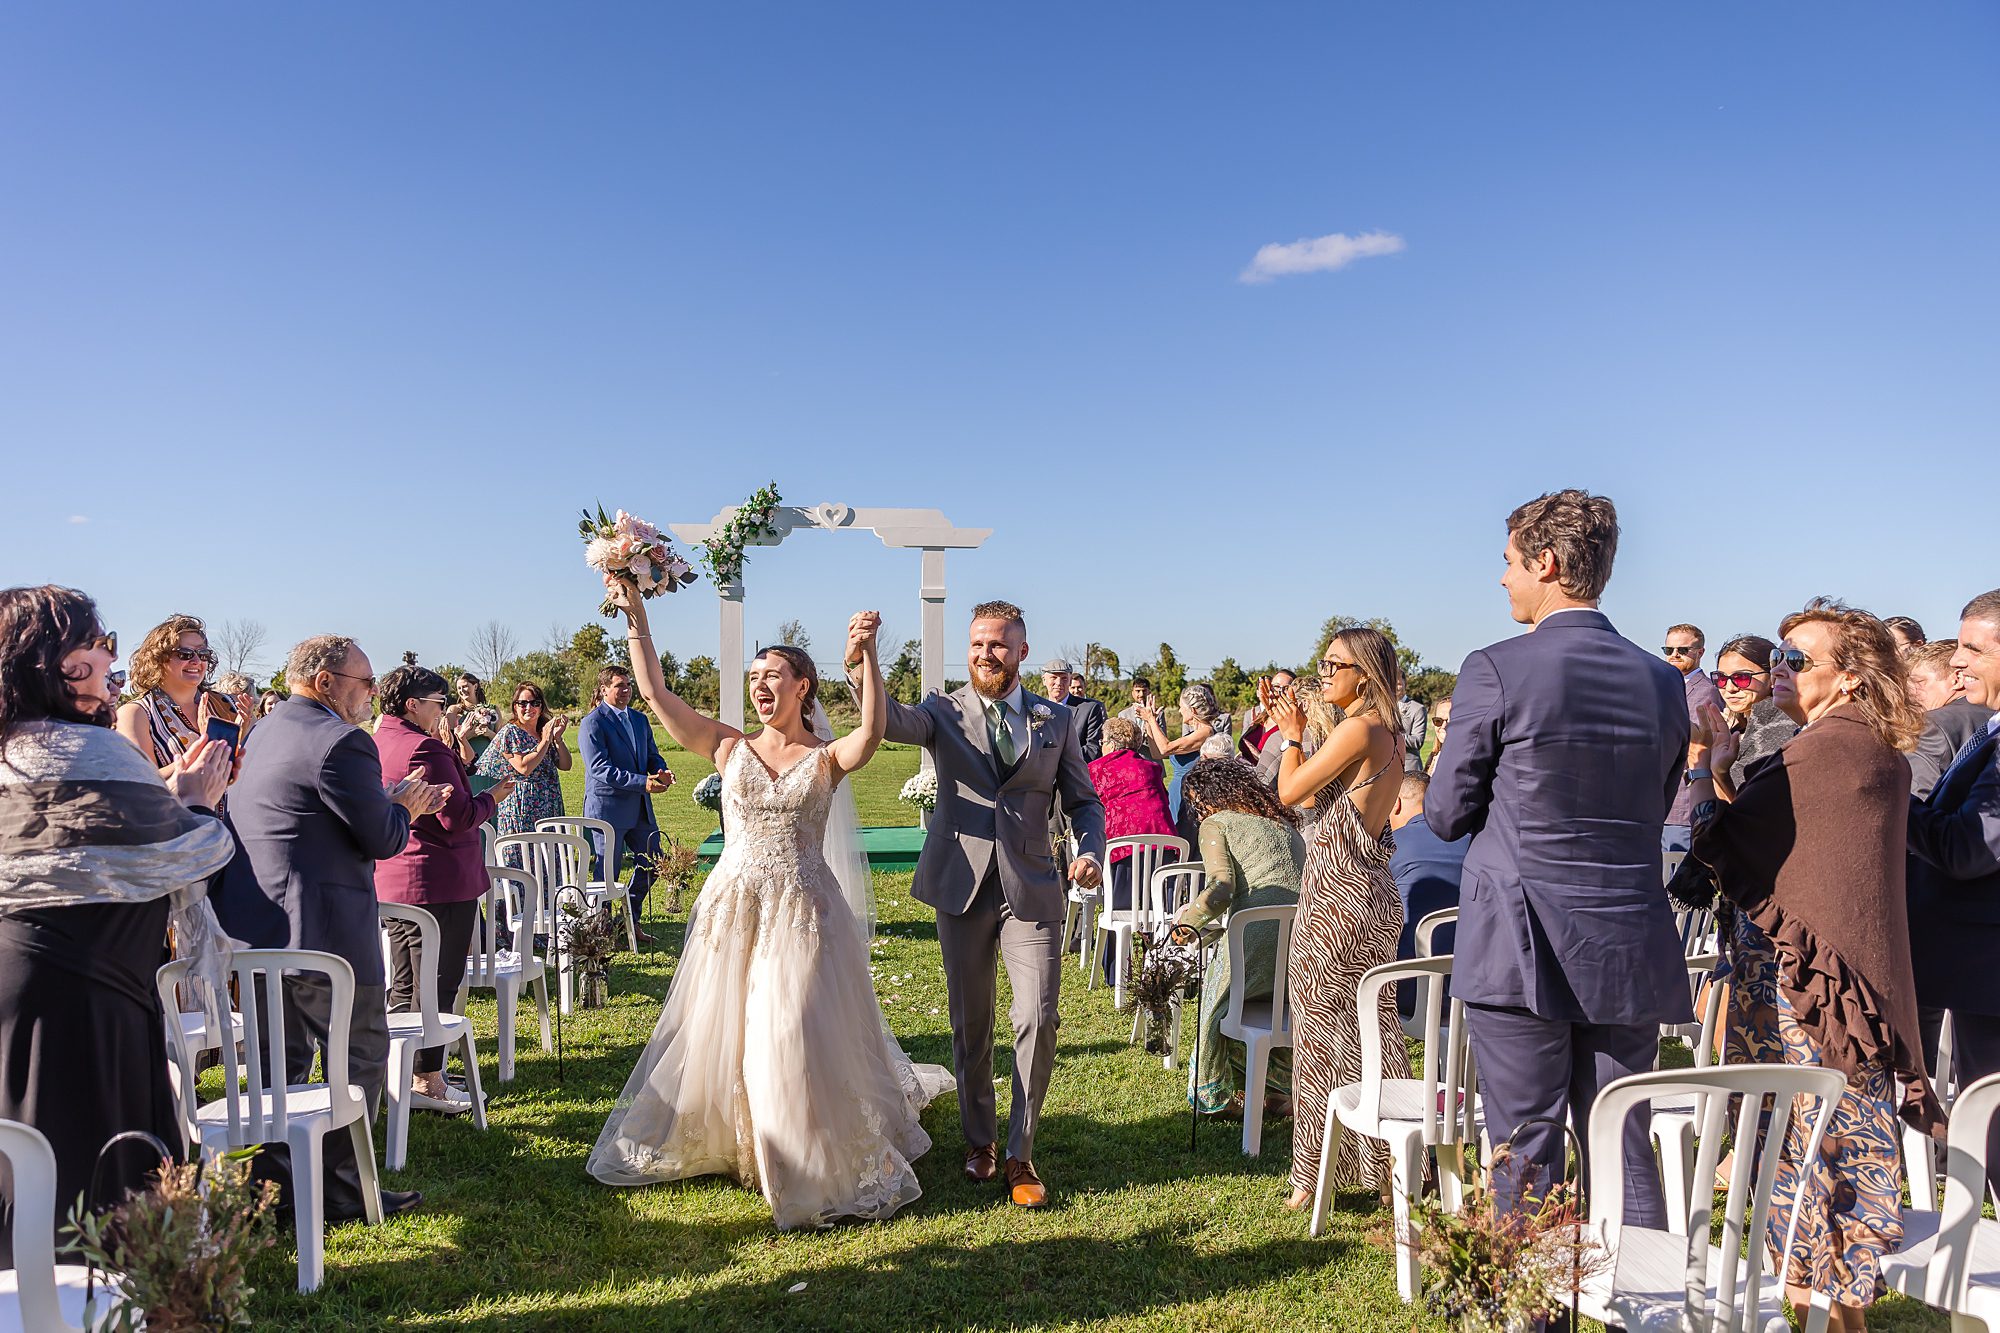 newlyweds celebrate walking down the aisle during outdoor ceremony